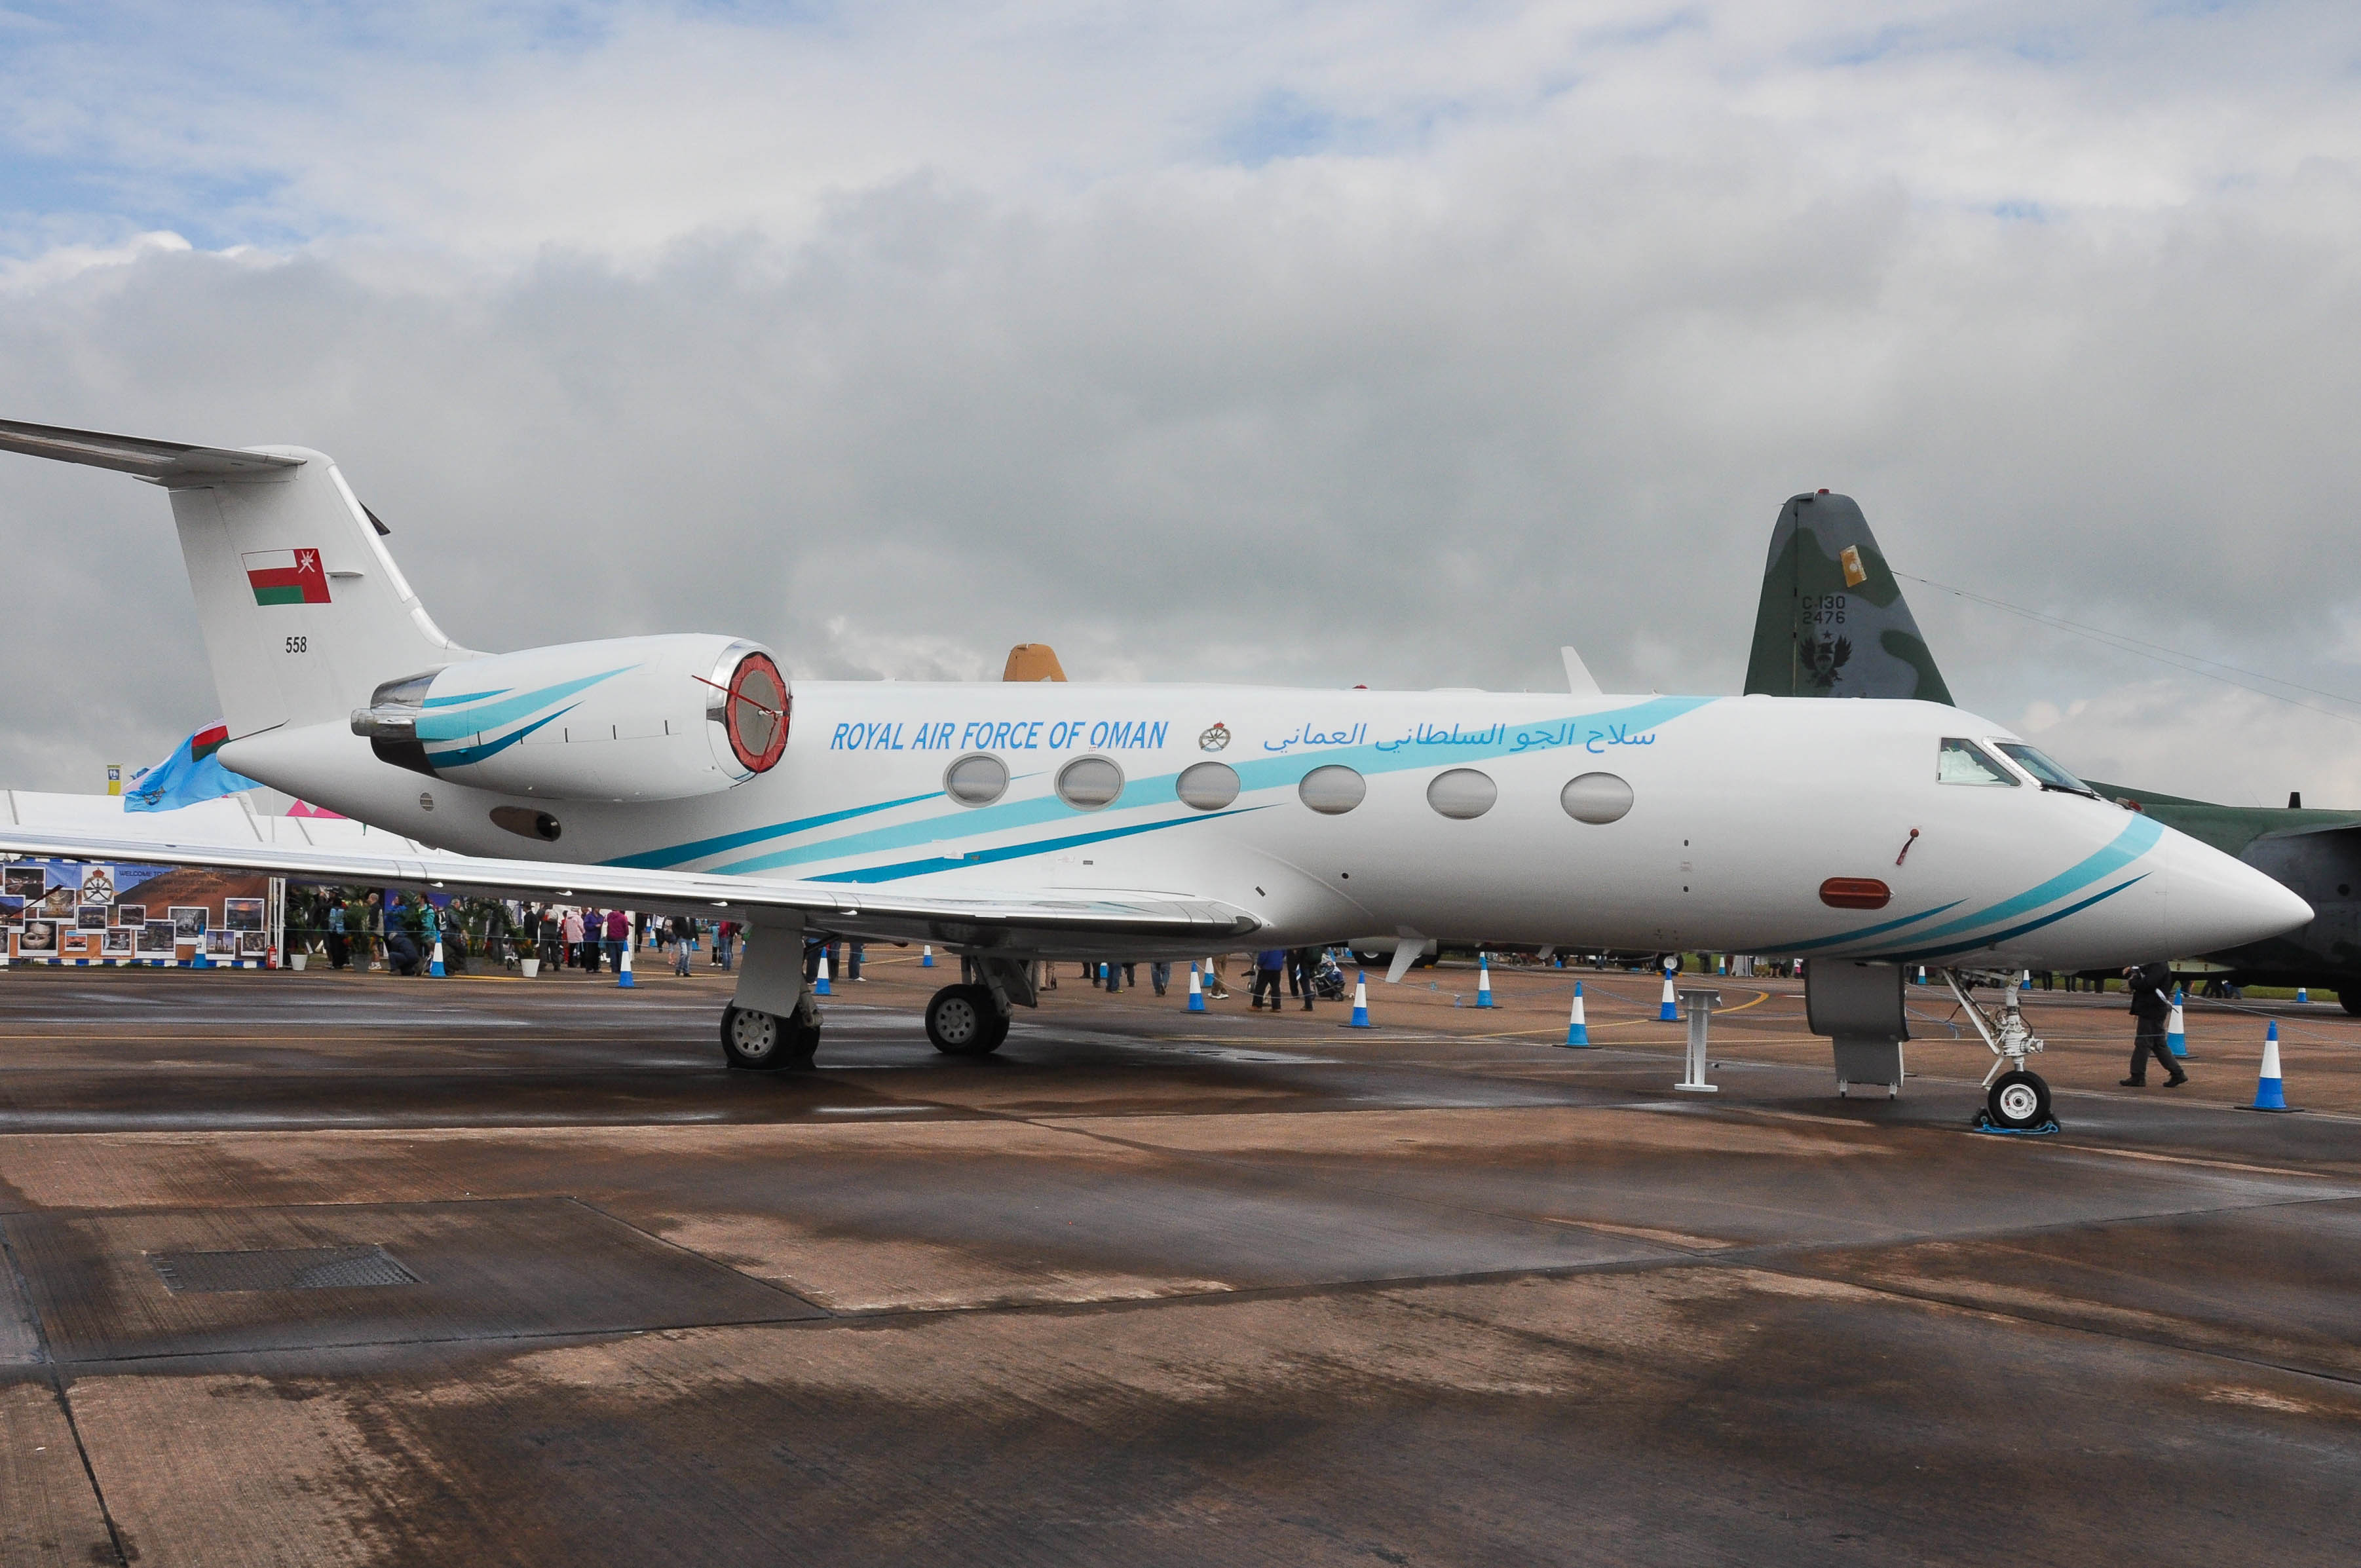 558/558 Royal Air Force of Oman Gulfstream Gulfstream G-IV Photo by colinw - AVSpotters.com